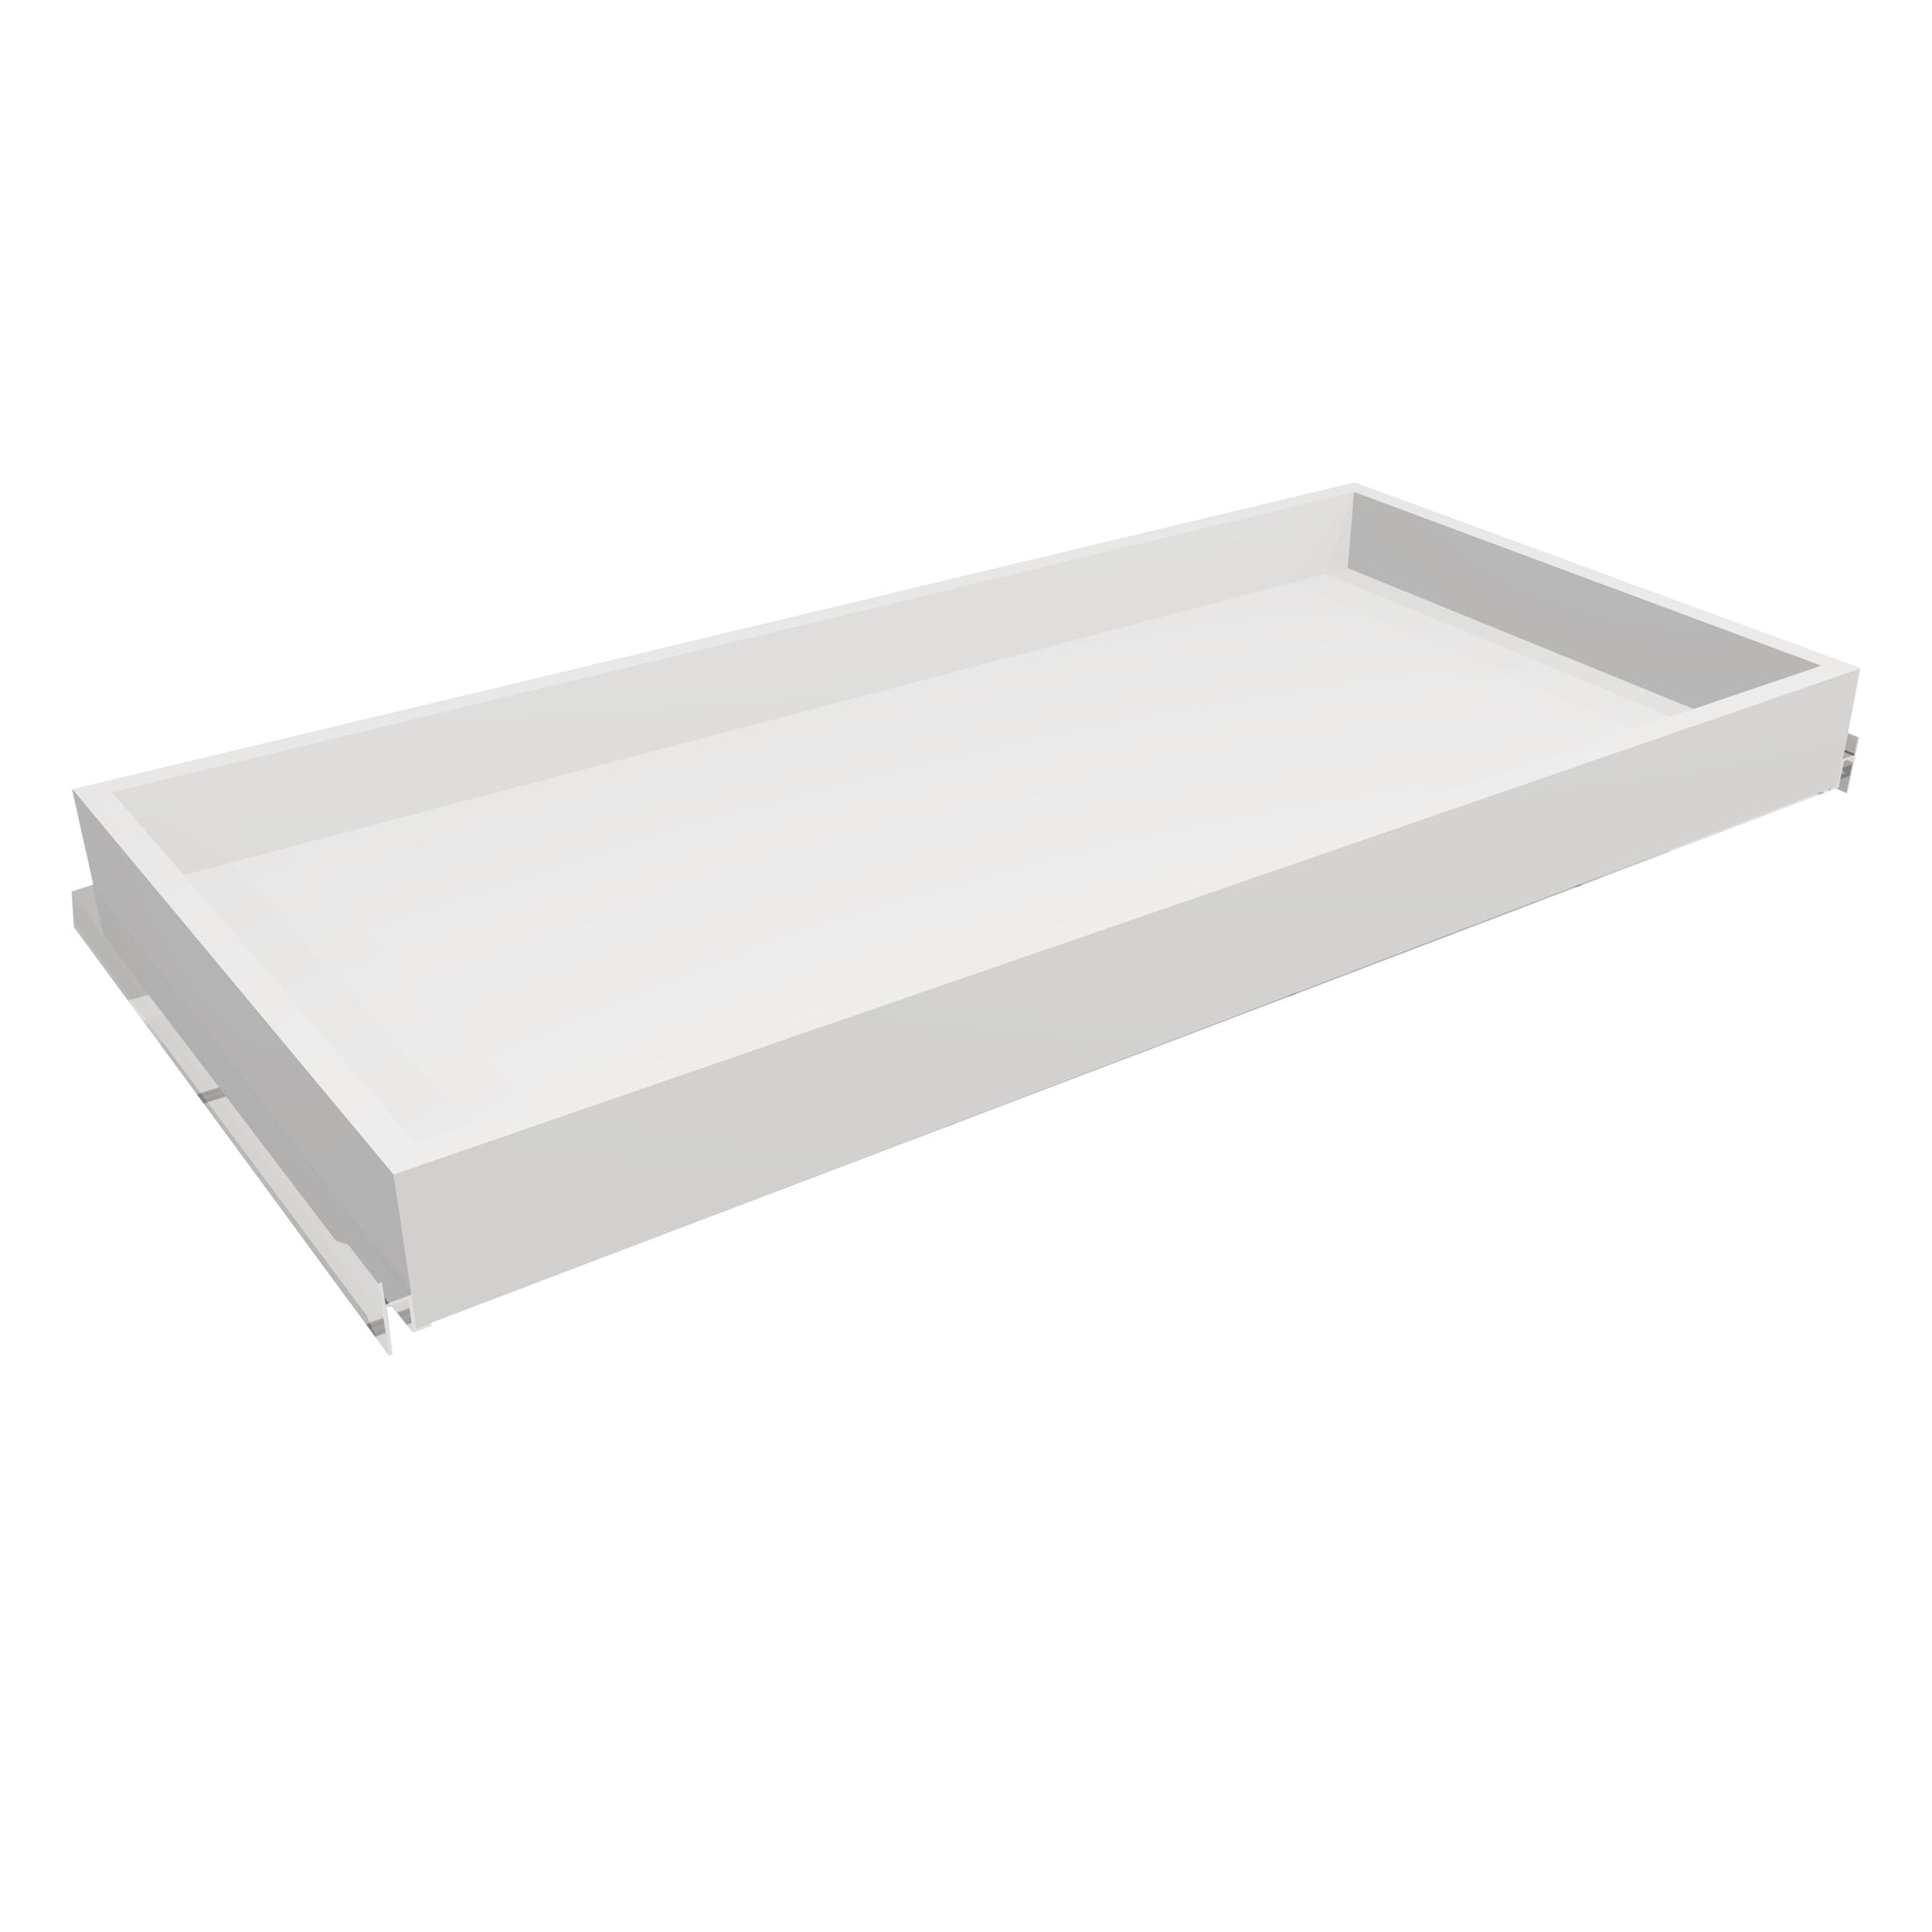 RTA - Glossy White - Roll Out Tray | 18"W